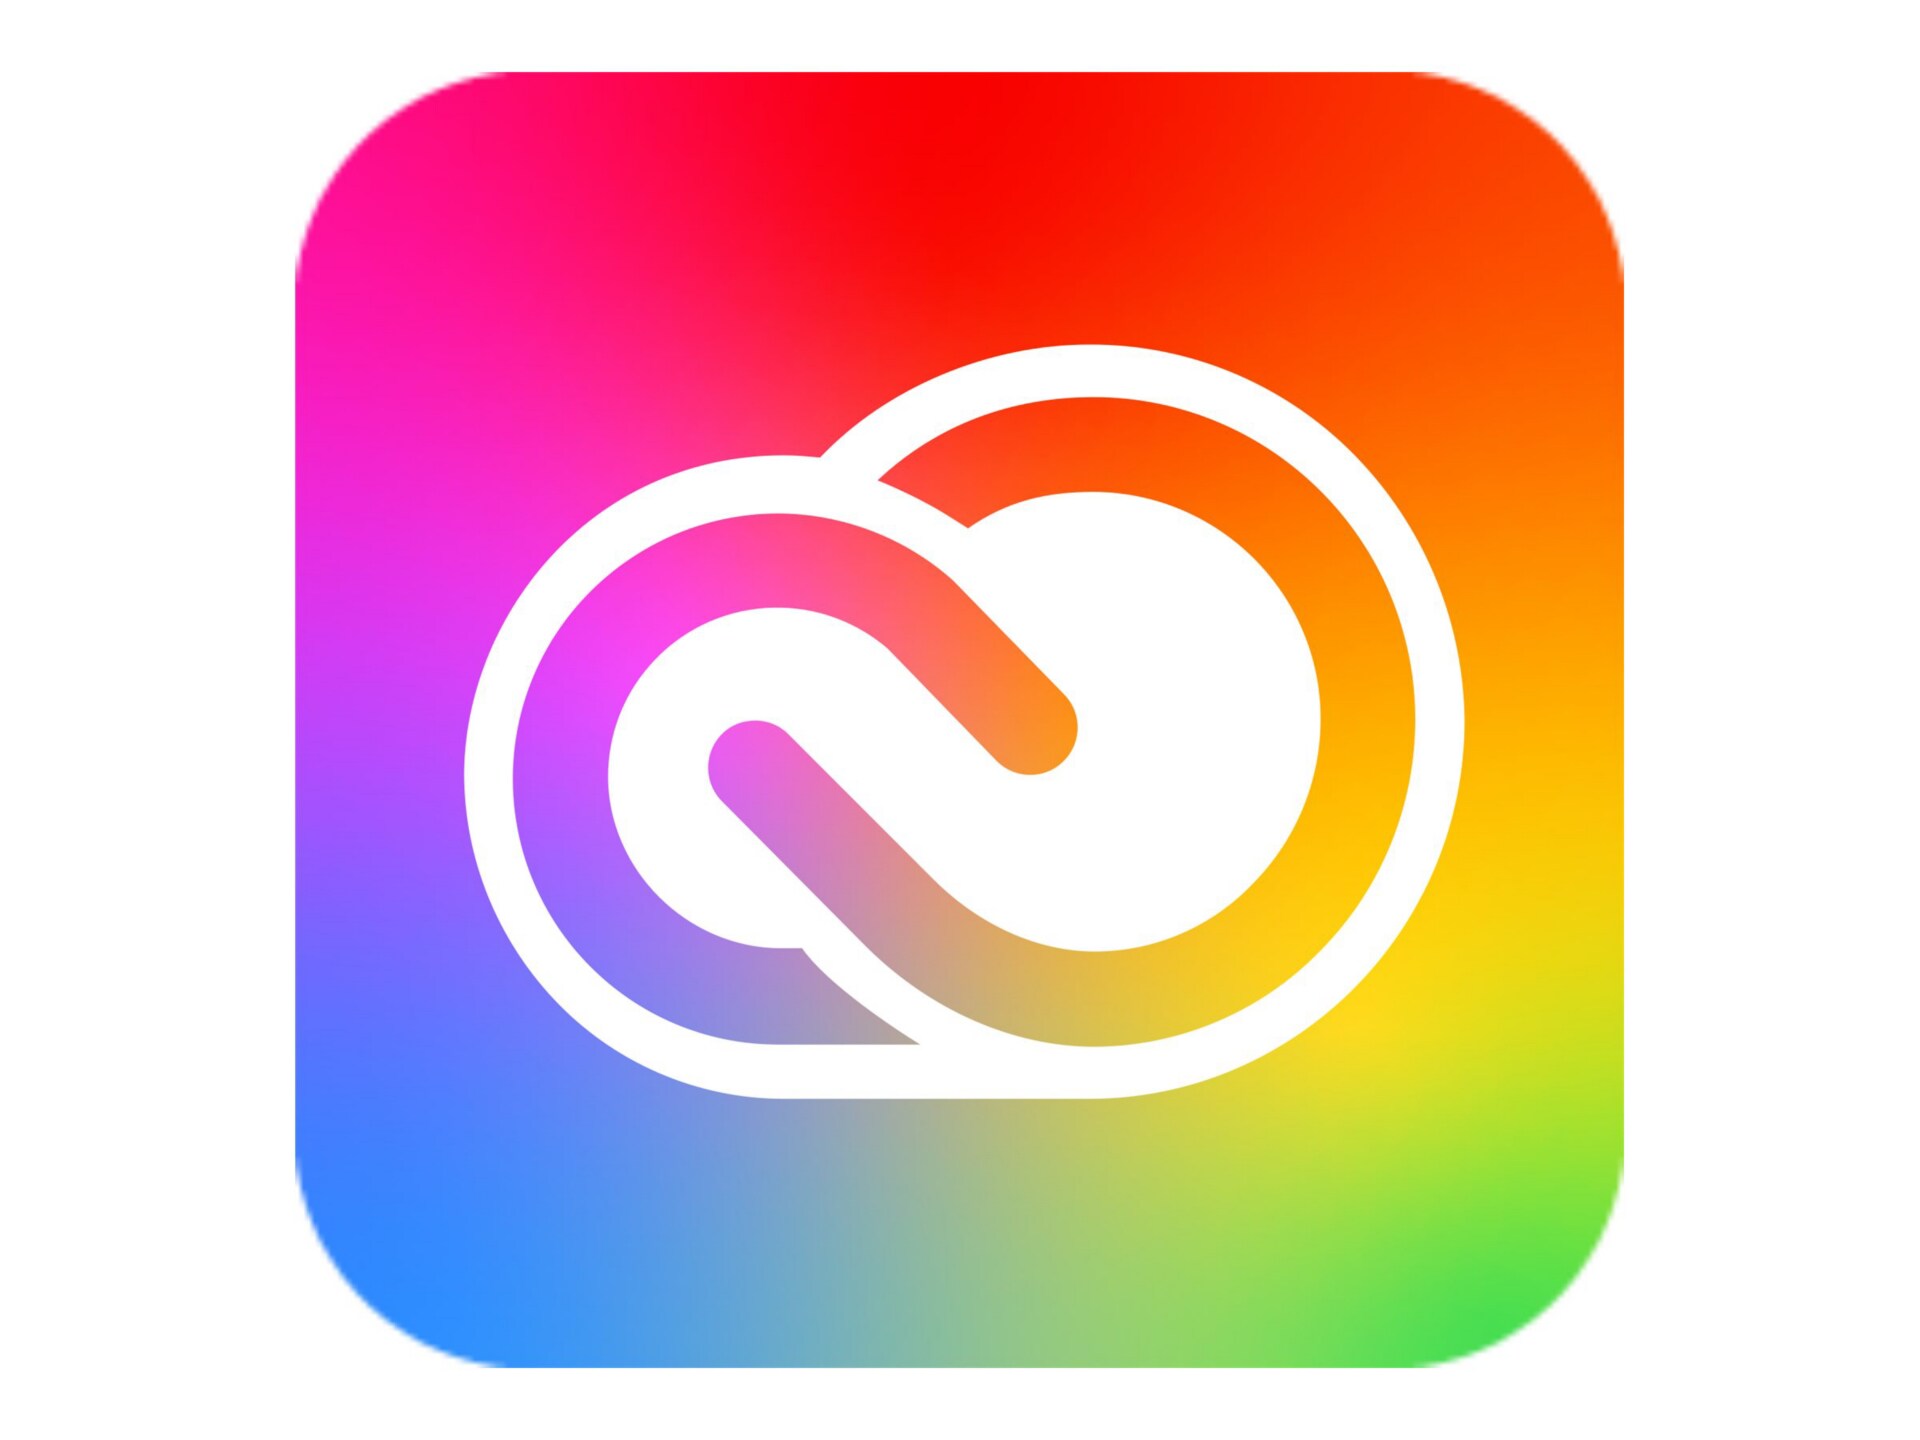 Adobe Creative Cloud for Enterprise - All Apps - Subscription New (16 month